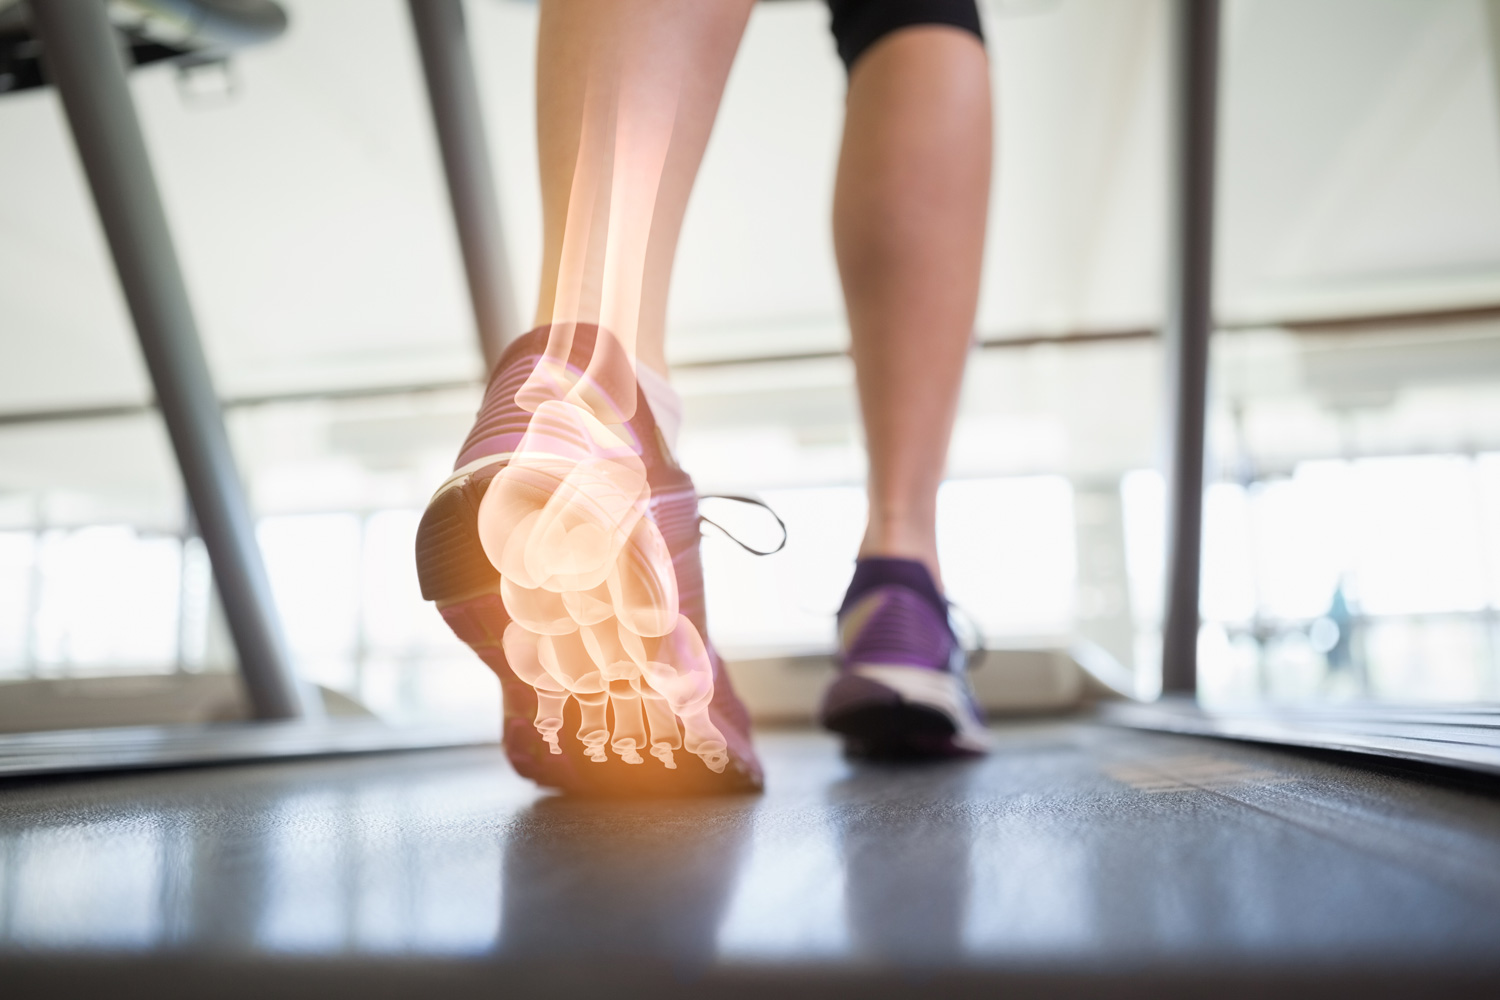 Skeleton structures in foot highlighted over someone walking on a machine